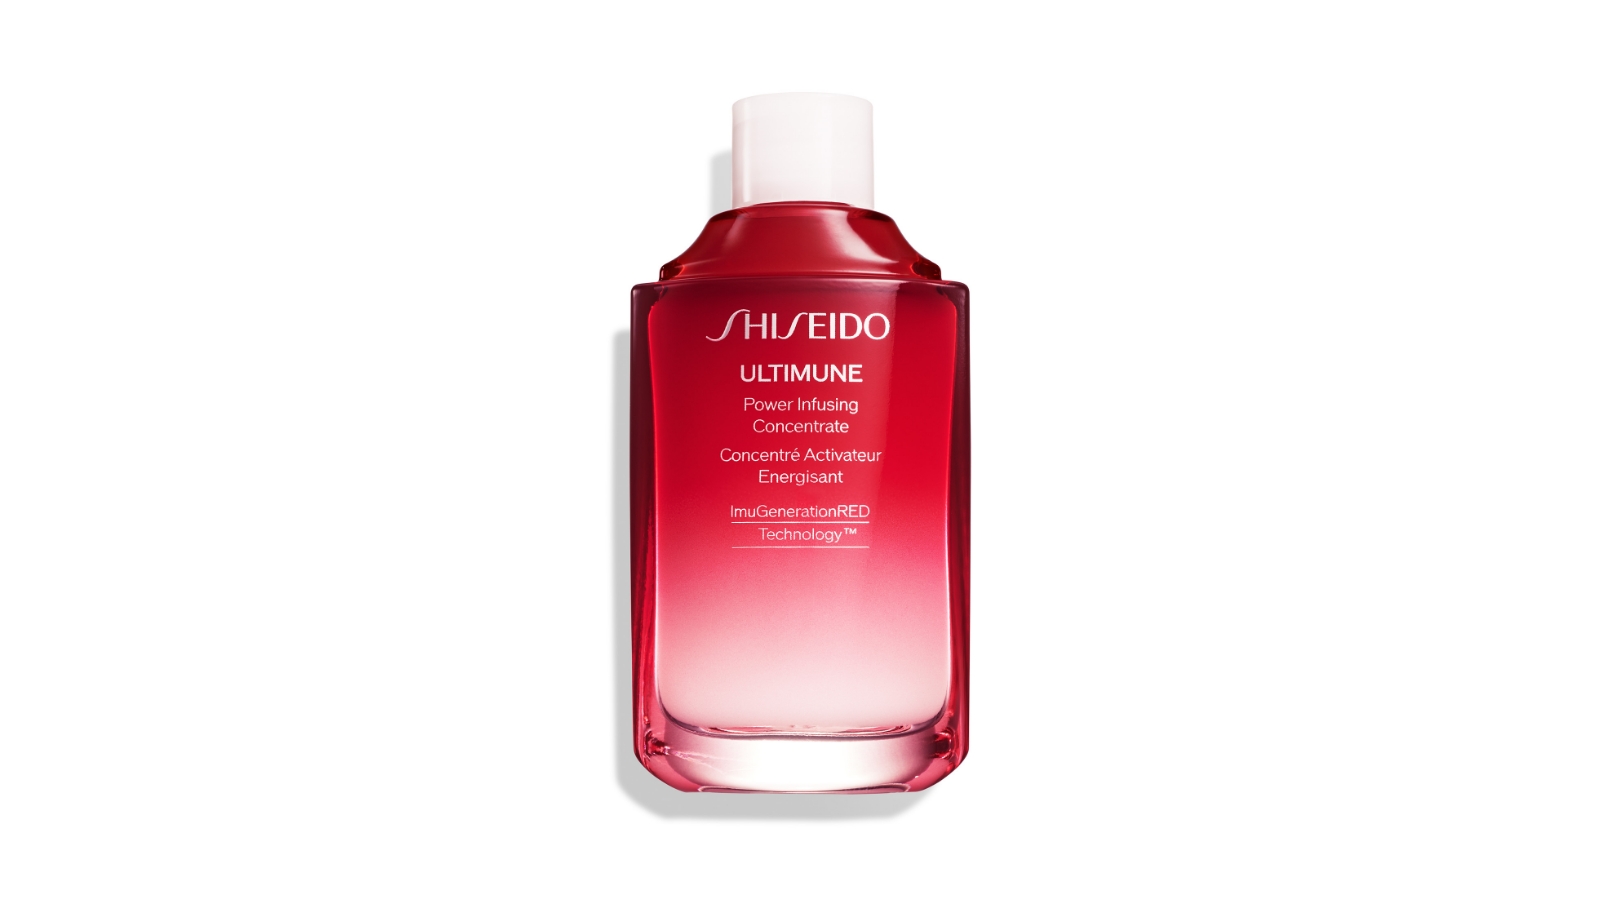 Shiseido’s UltimuneTM Power Infusing Concentrate III container made from recycled glass.